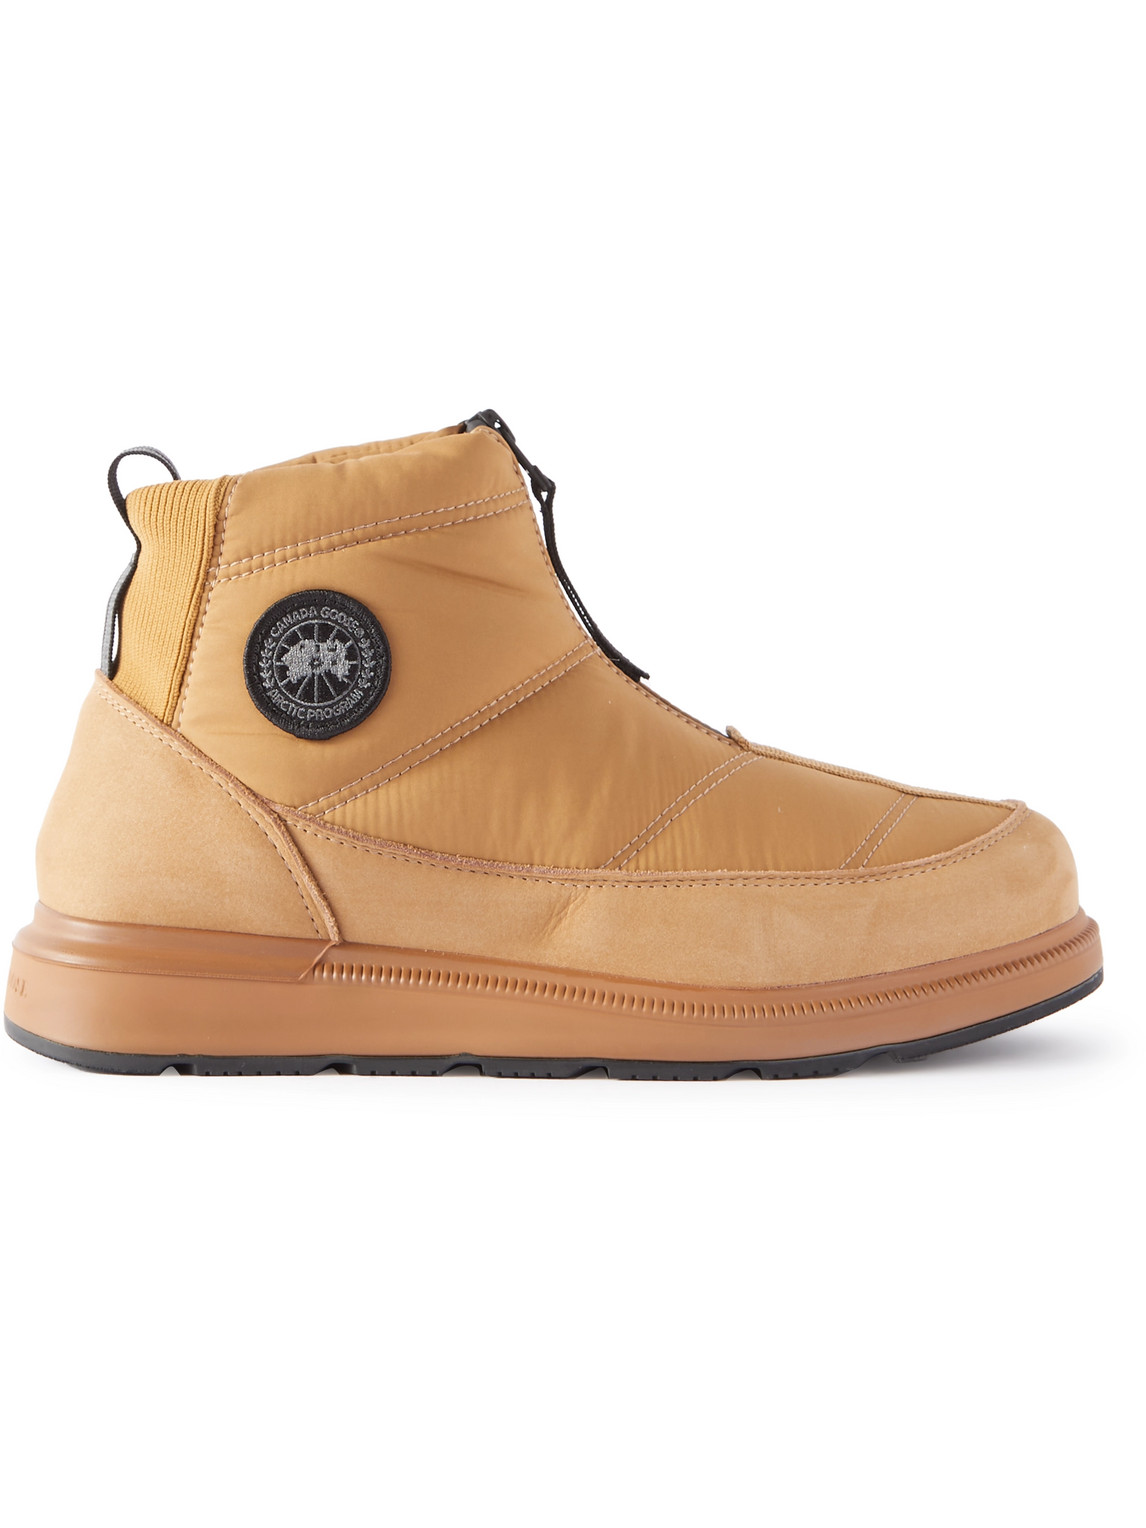 Canada Goose Crofton Leather-Trimmed Quilted Shell Boots